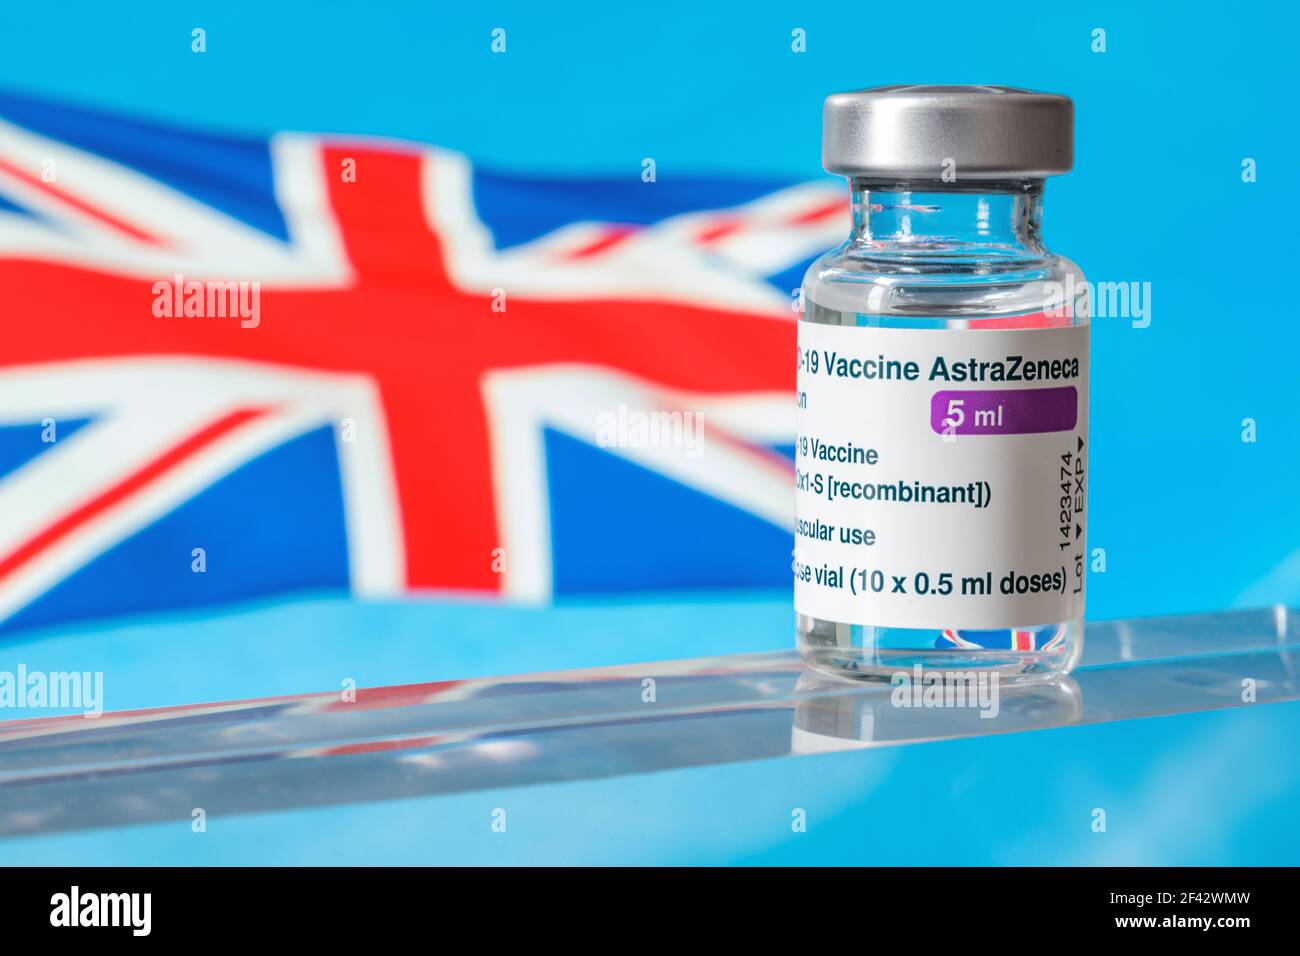 Montreal, CA - 18 March 2021: Vial of Astrazeneca Covid-19 vaccine in front of a United Kingdom flag Stock Photo